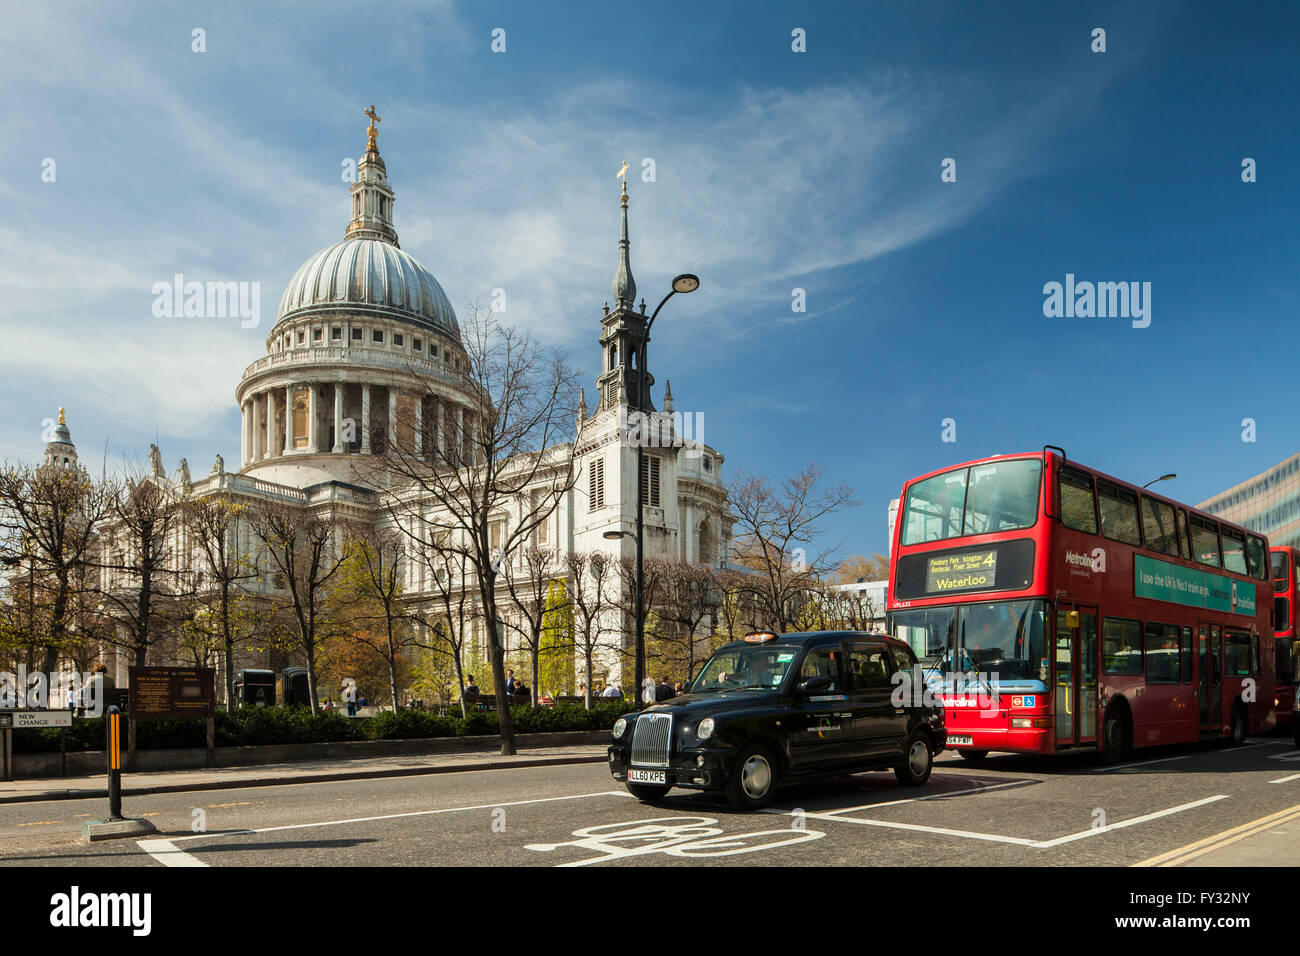 Iconic London cab and double decker bus in front of St Paul's Cathedral, England. Stock Photo